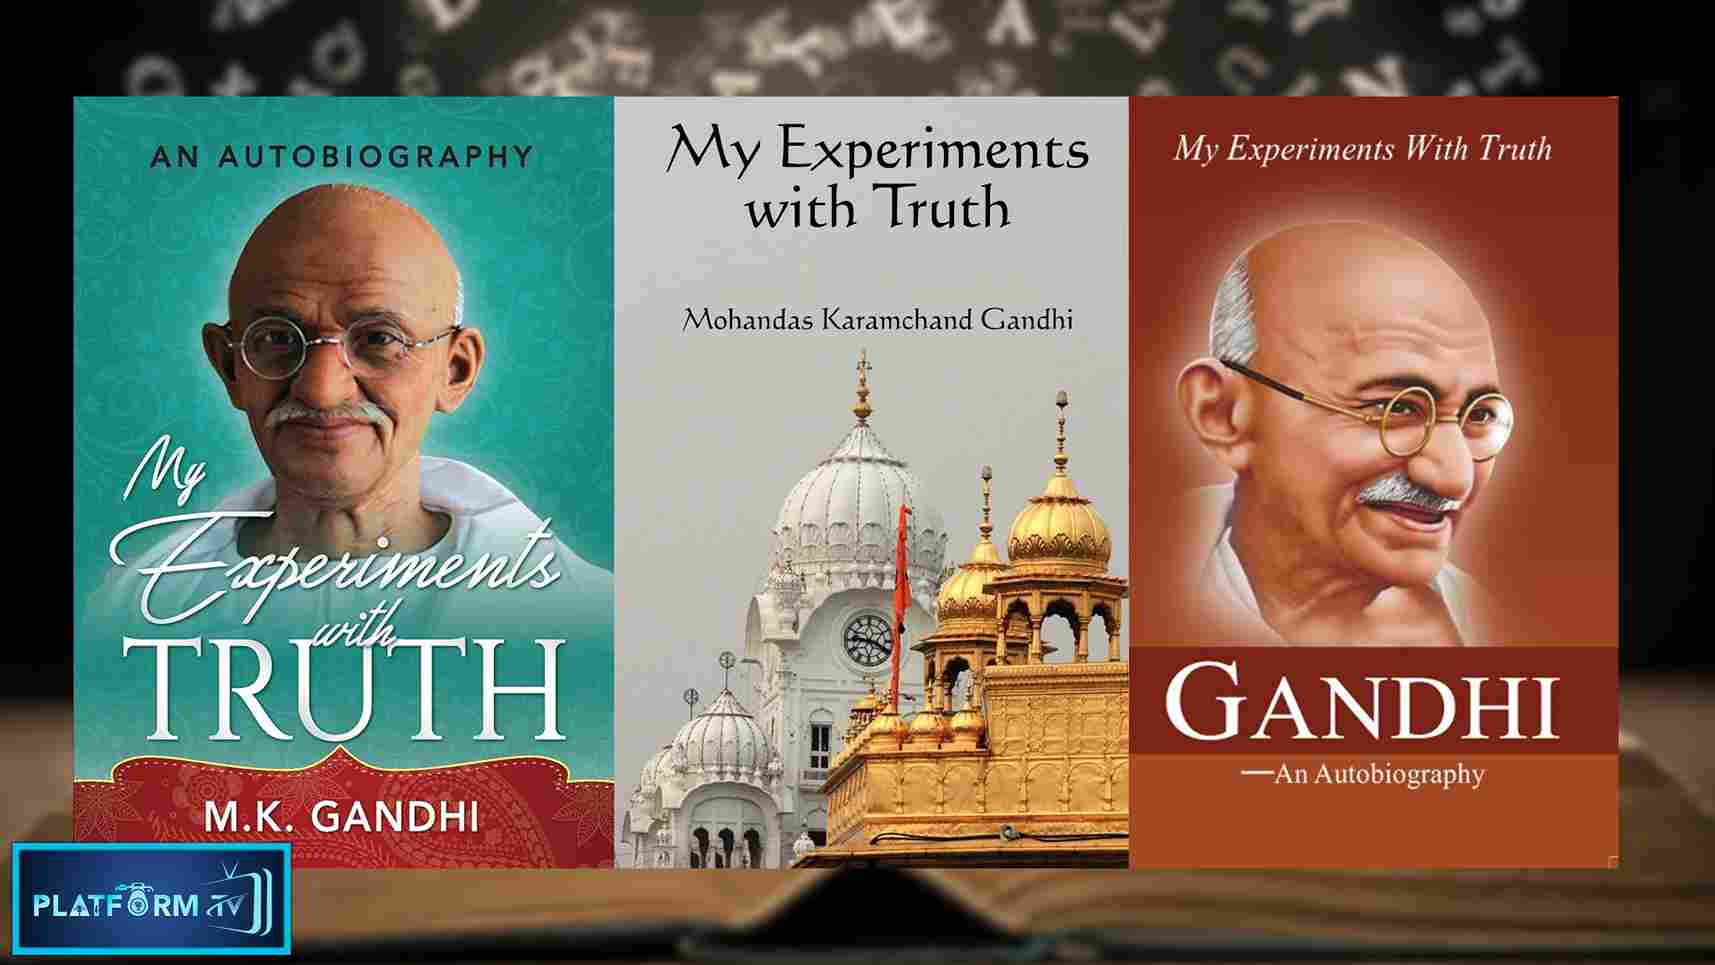 My Experiments With Truth - Platform Tamil